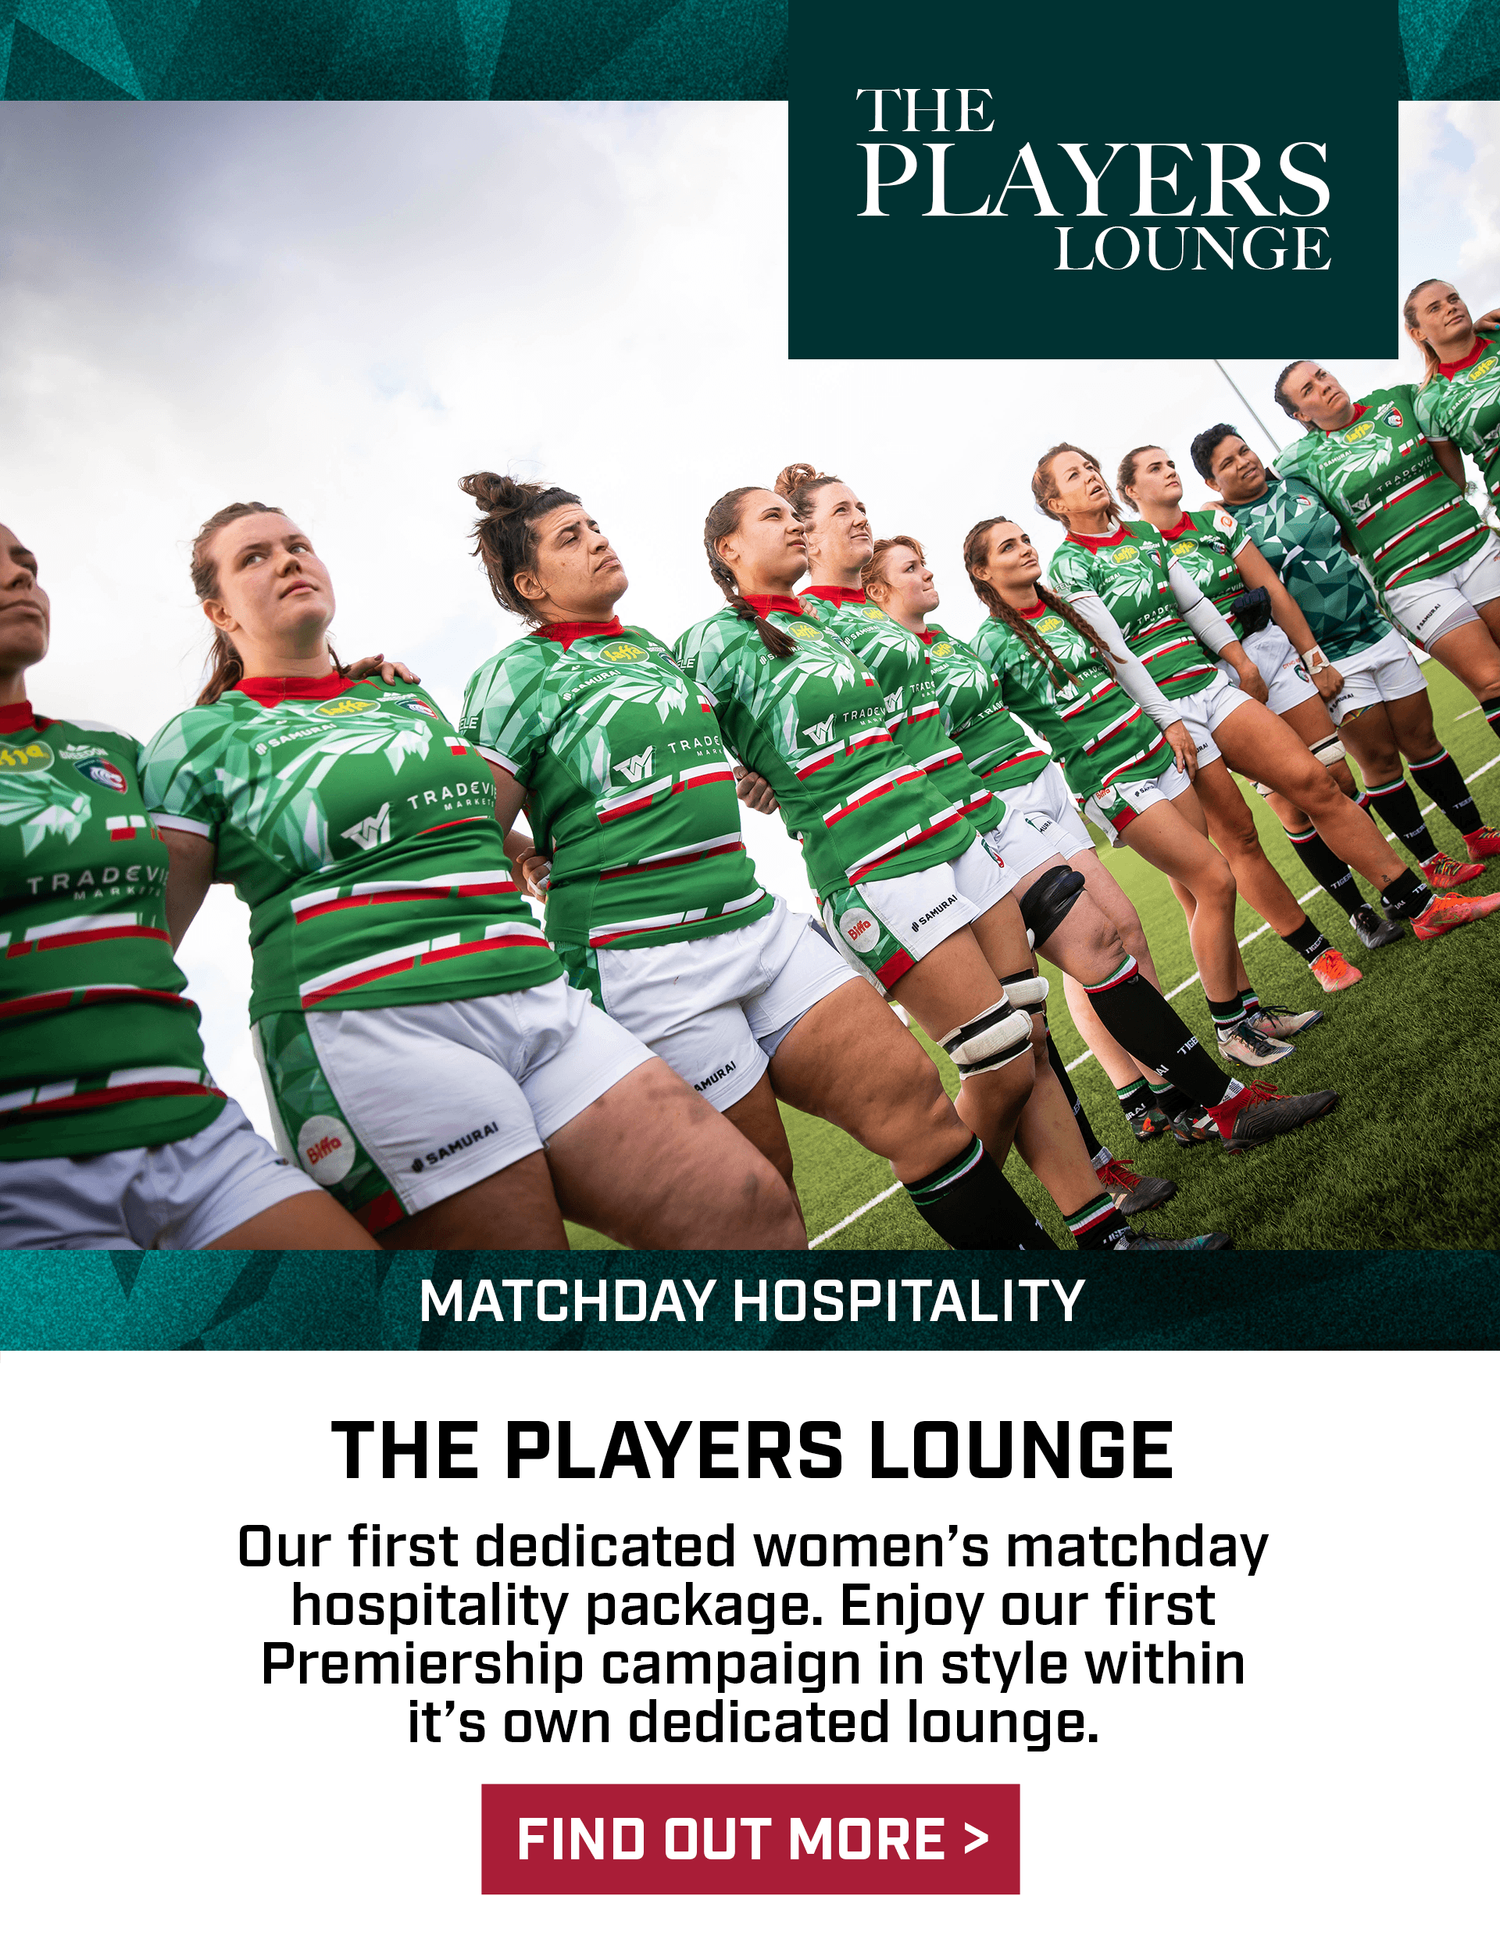 Leicester Tigers Hospitality - The Players Lounge